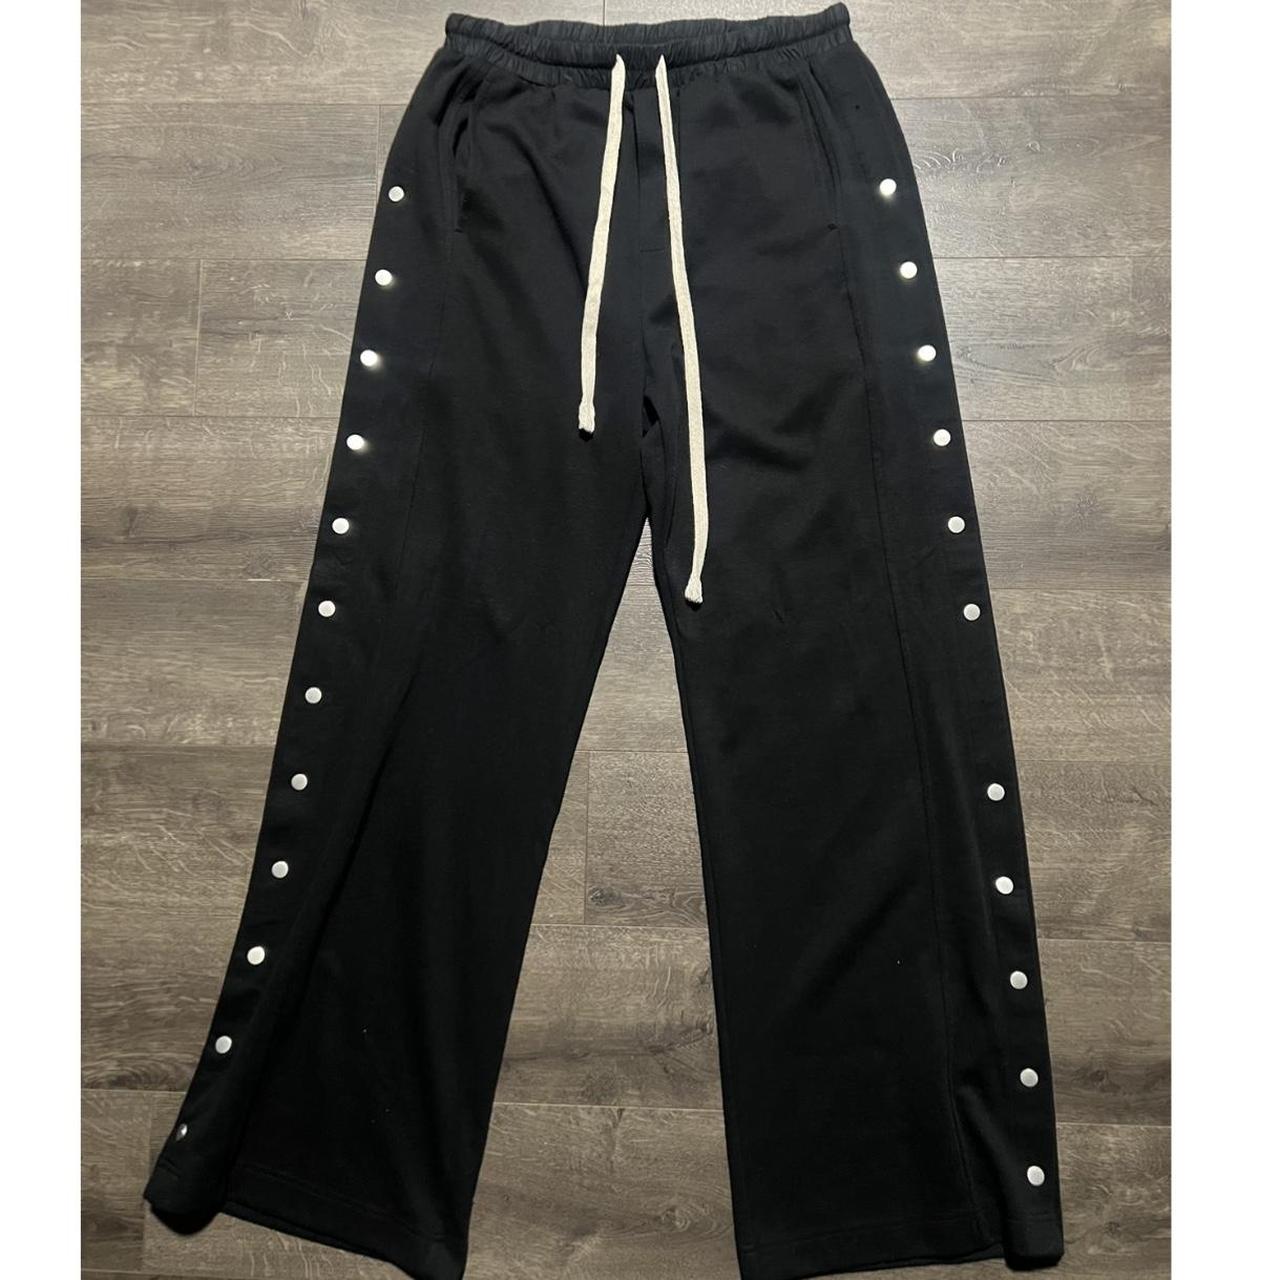 Rick Owens pusher sweats size 36 can fit 34 has a... - Depop